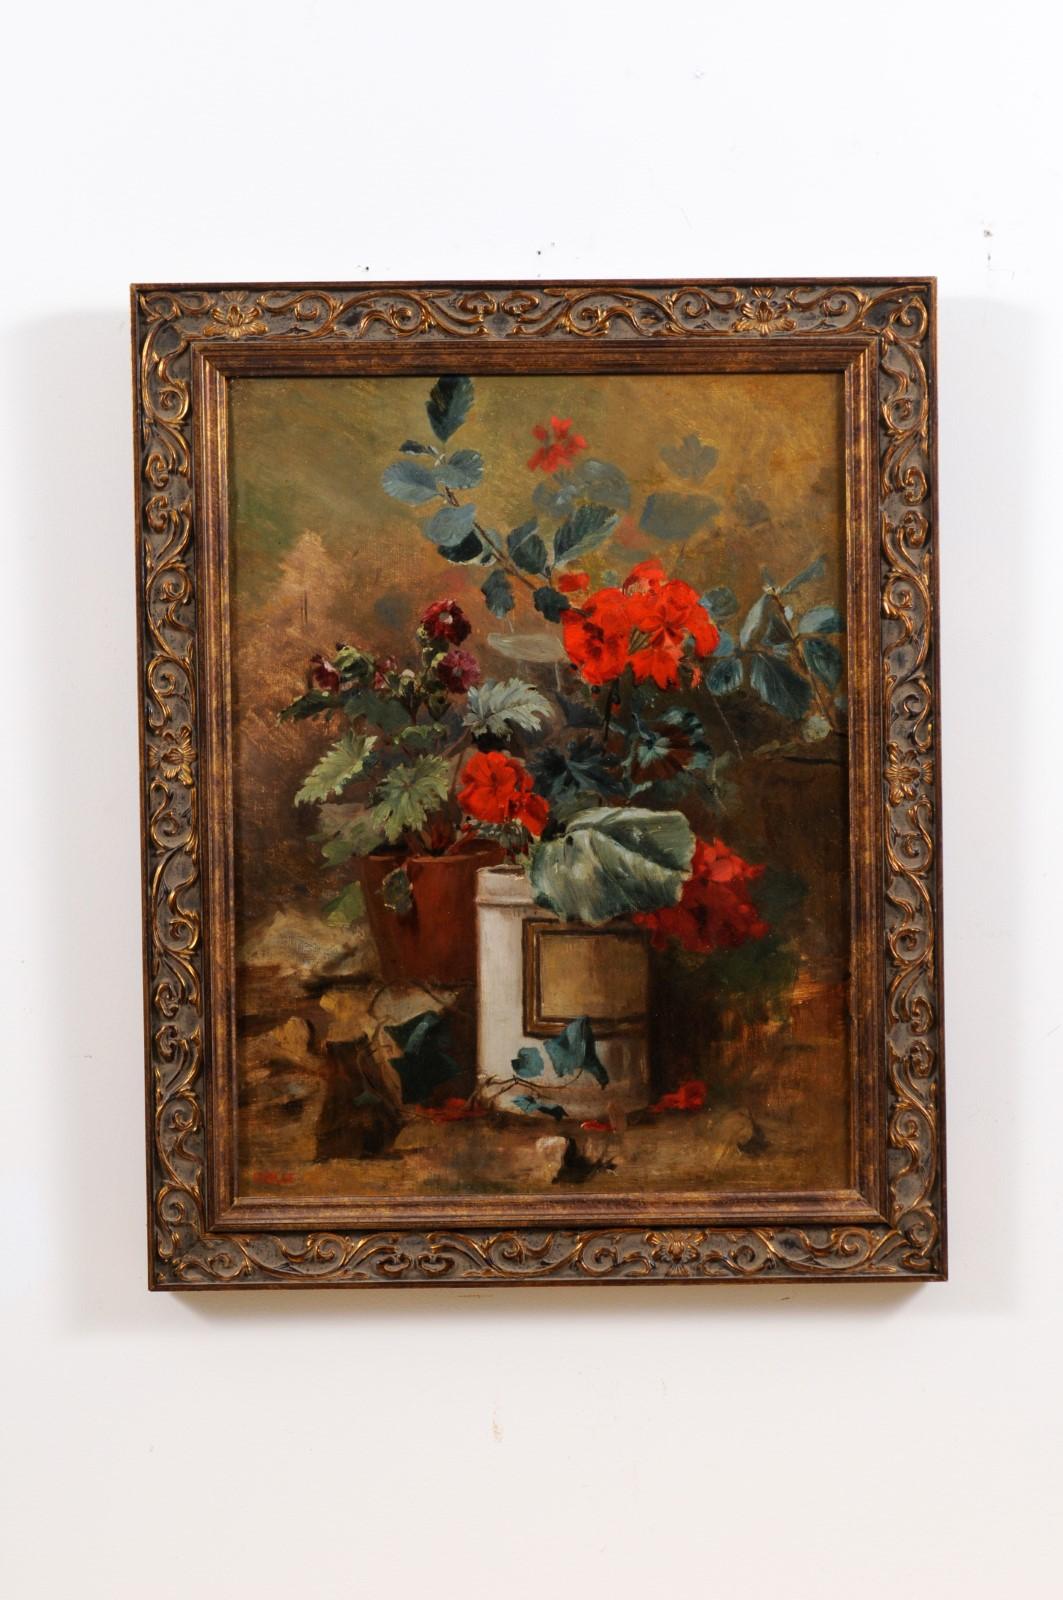 A French vertical oil on canvas framed painting from the 19th century, depicting flowers in a apothecary jar, signed Murat. Created in France during the 19th century, this oil on canvas painting captures our attention with its colorful bouquet of